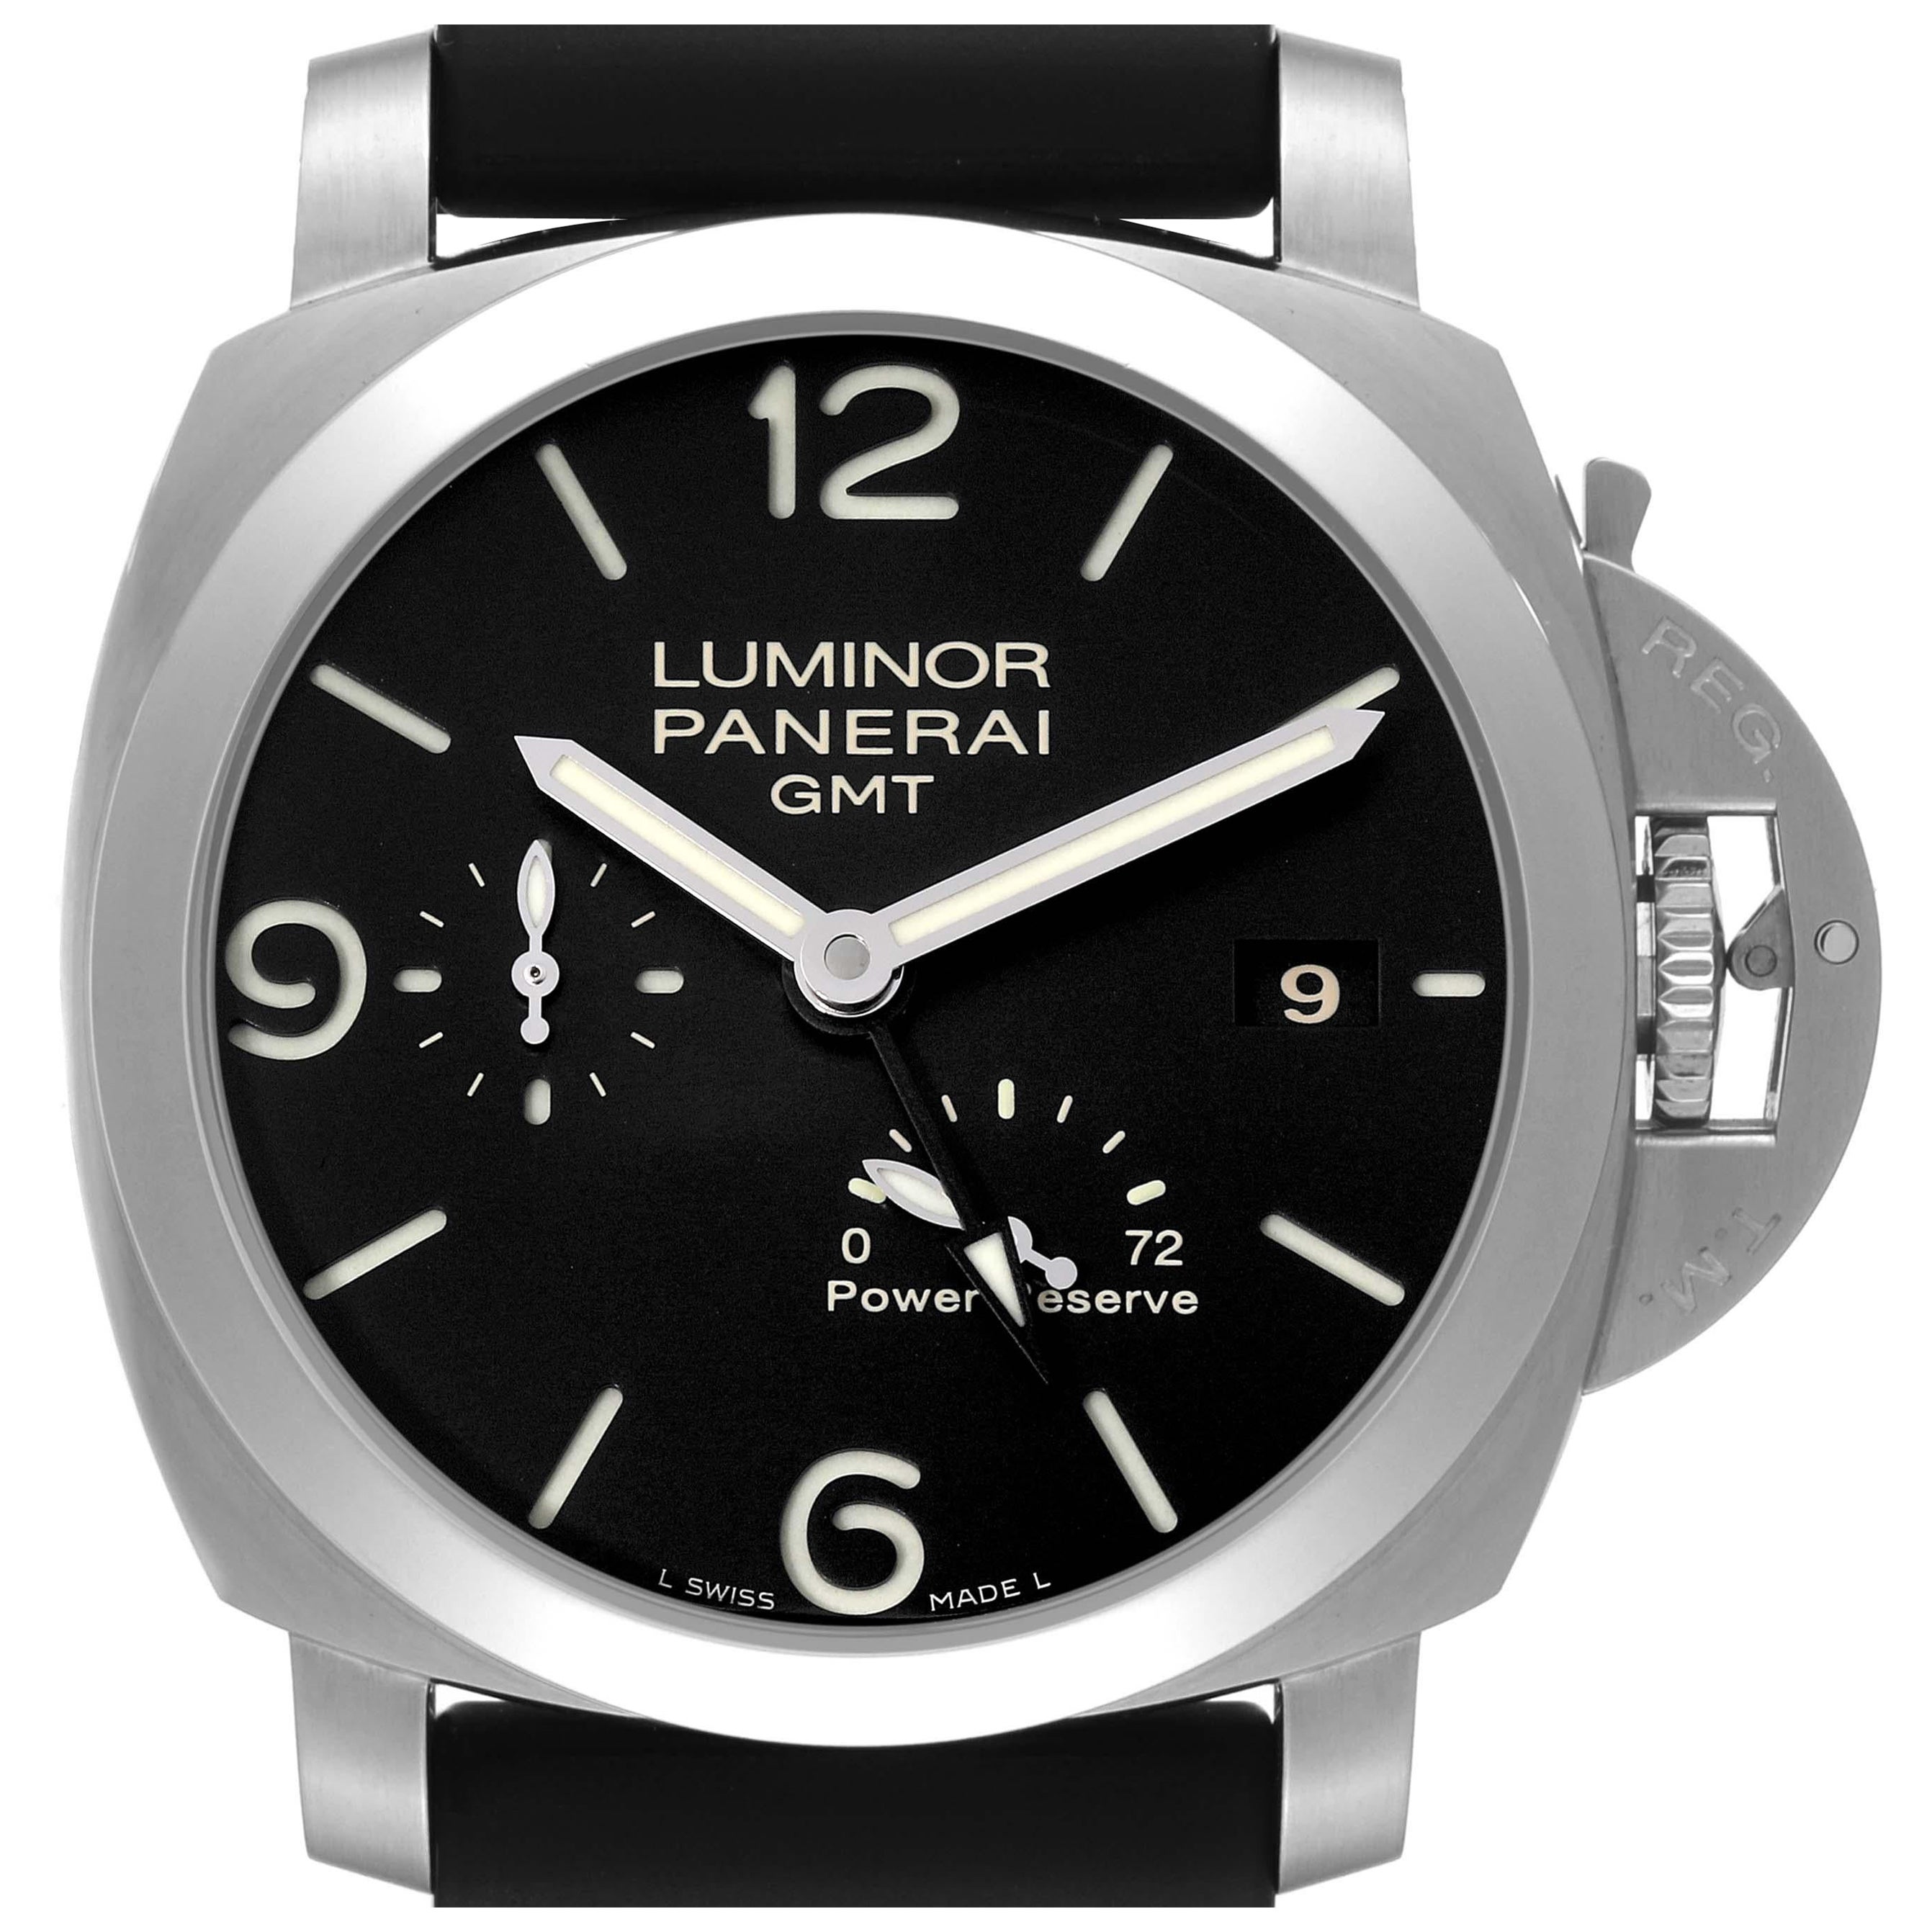 Panerai Luminor GMT 1950 3 Days Power Reserve Steel Watch PAM00321 Box Papers For Sale